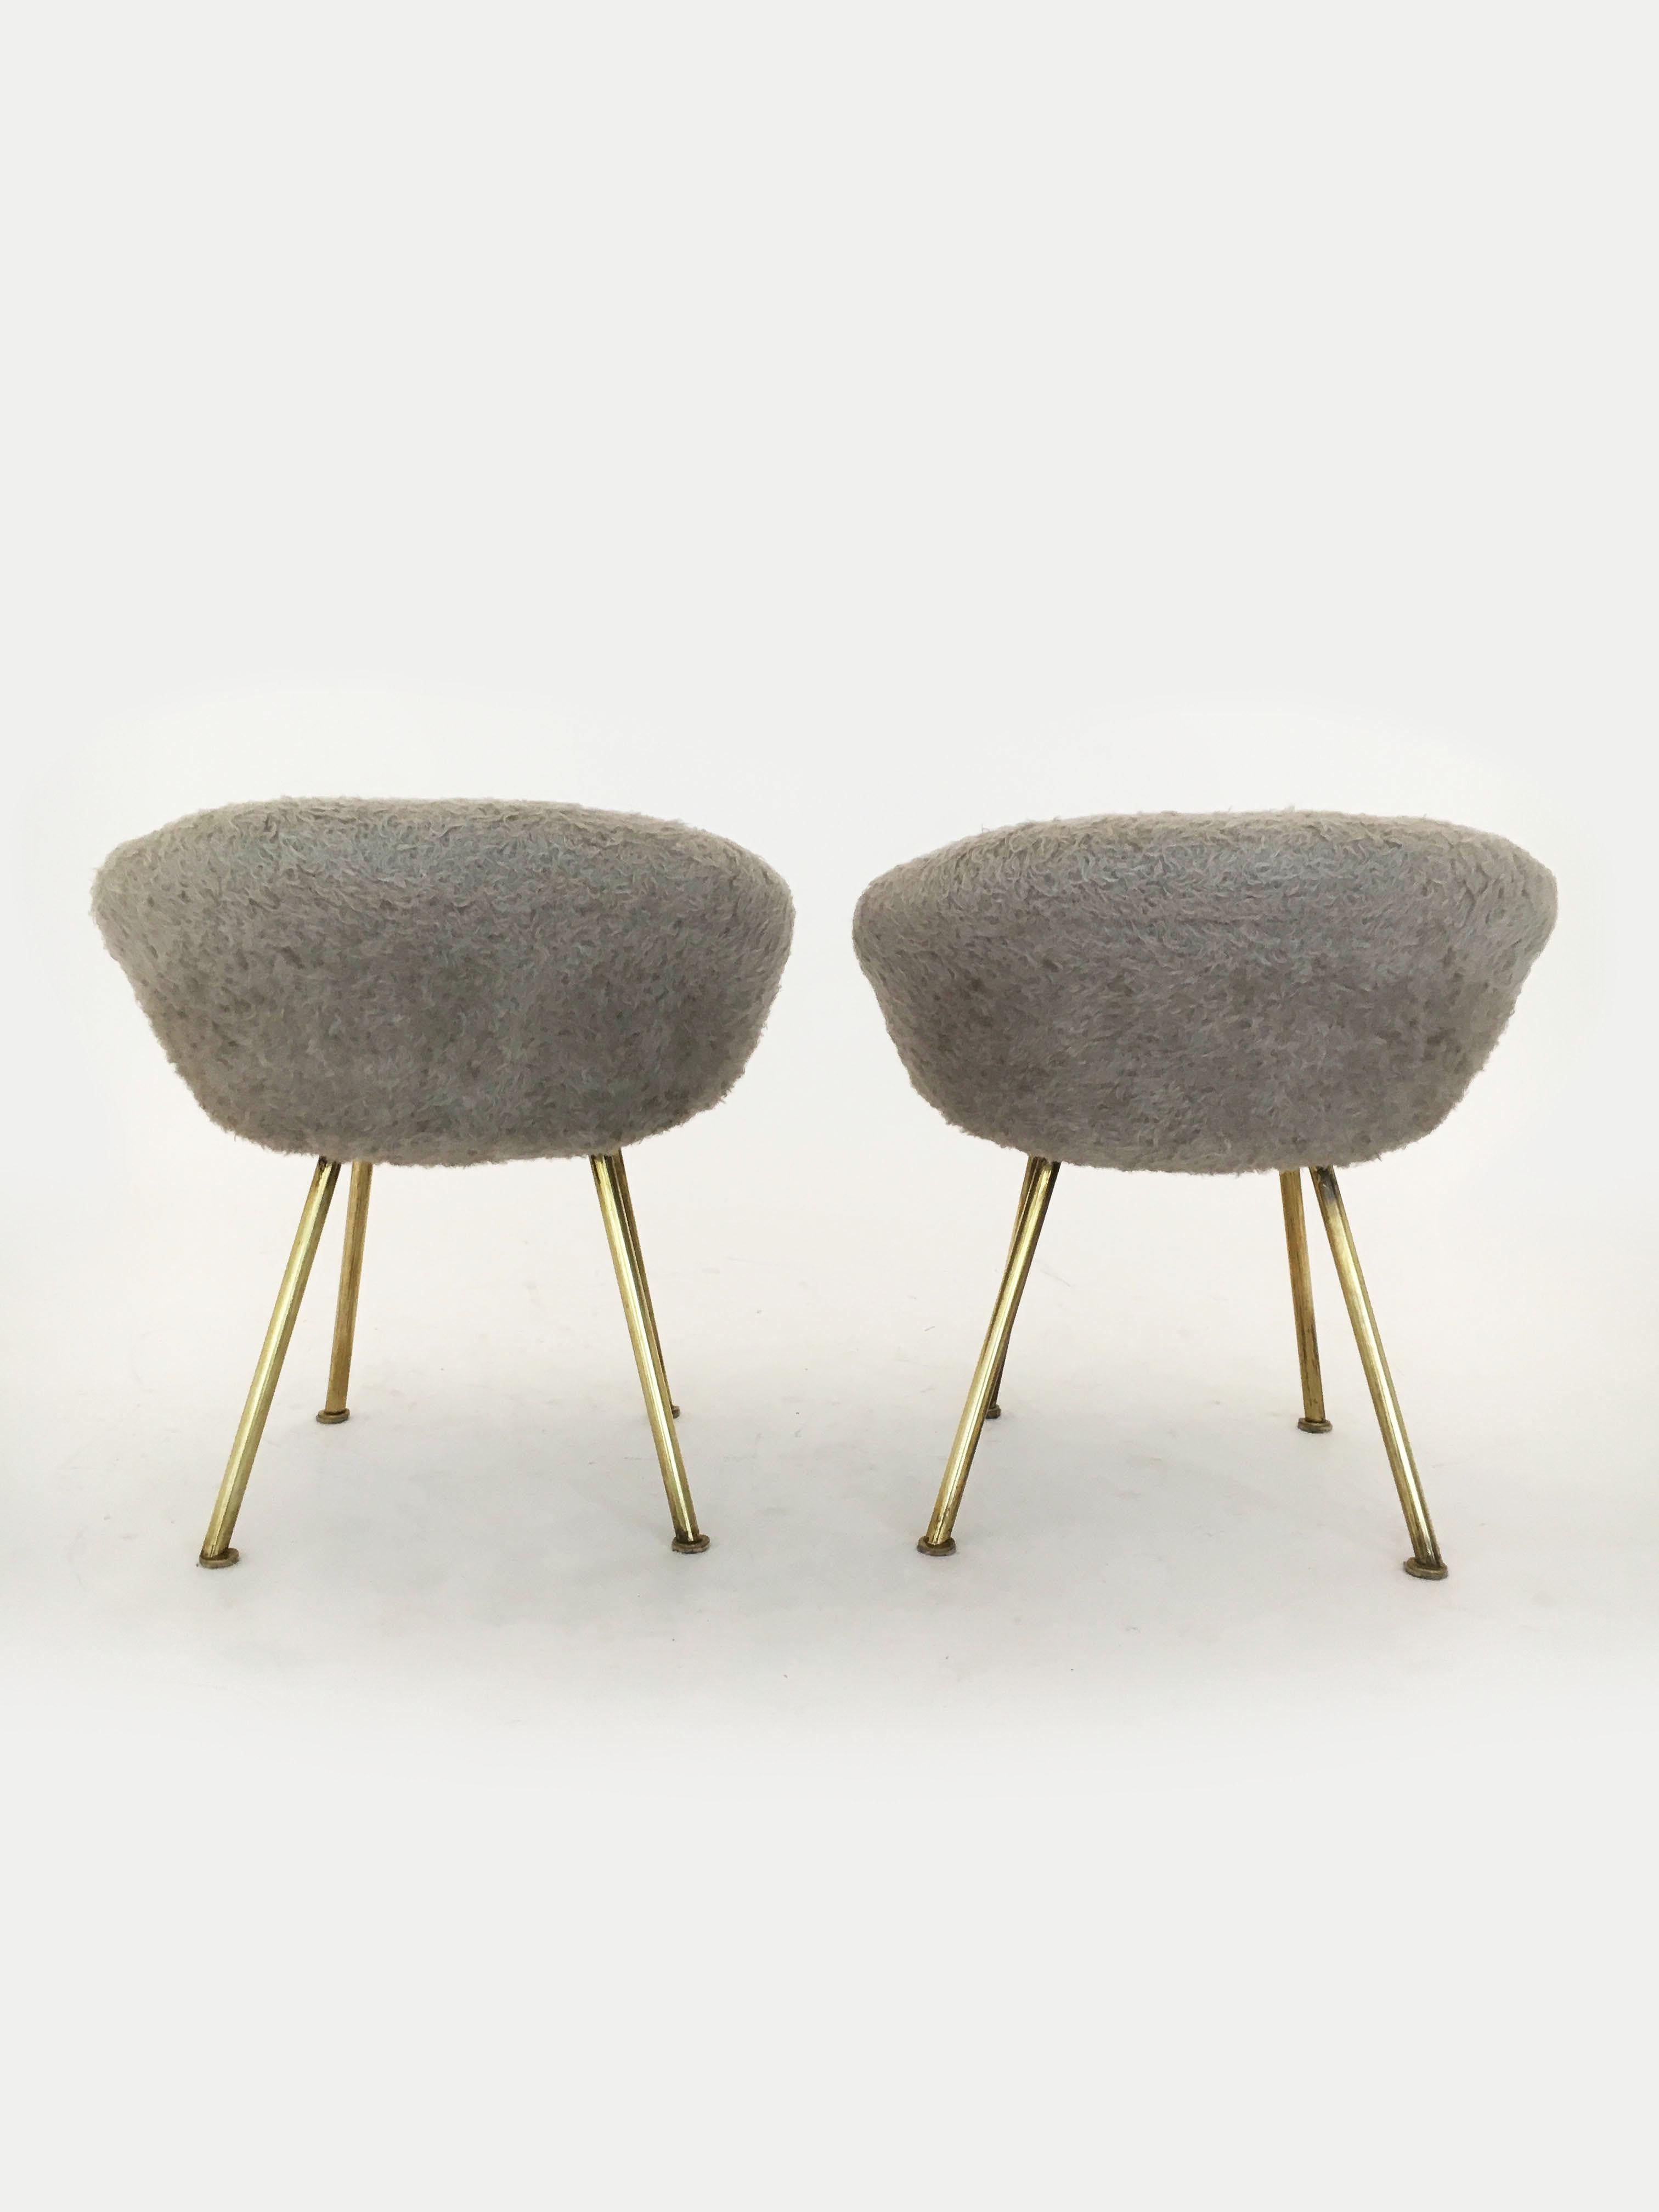 Upholstery Petite Sheepskin Fur Vanity Stools after Jean Royère, France 1950s